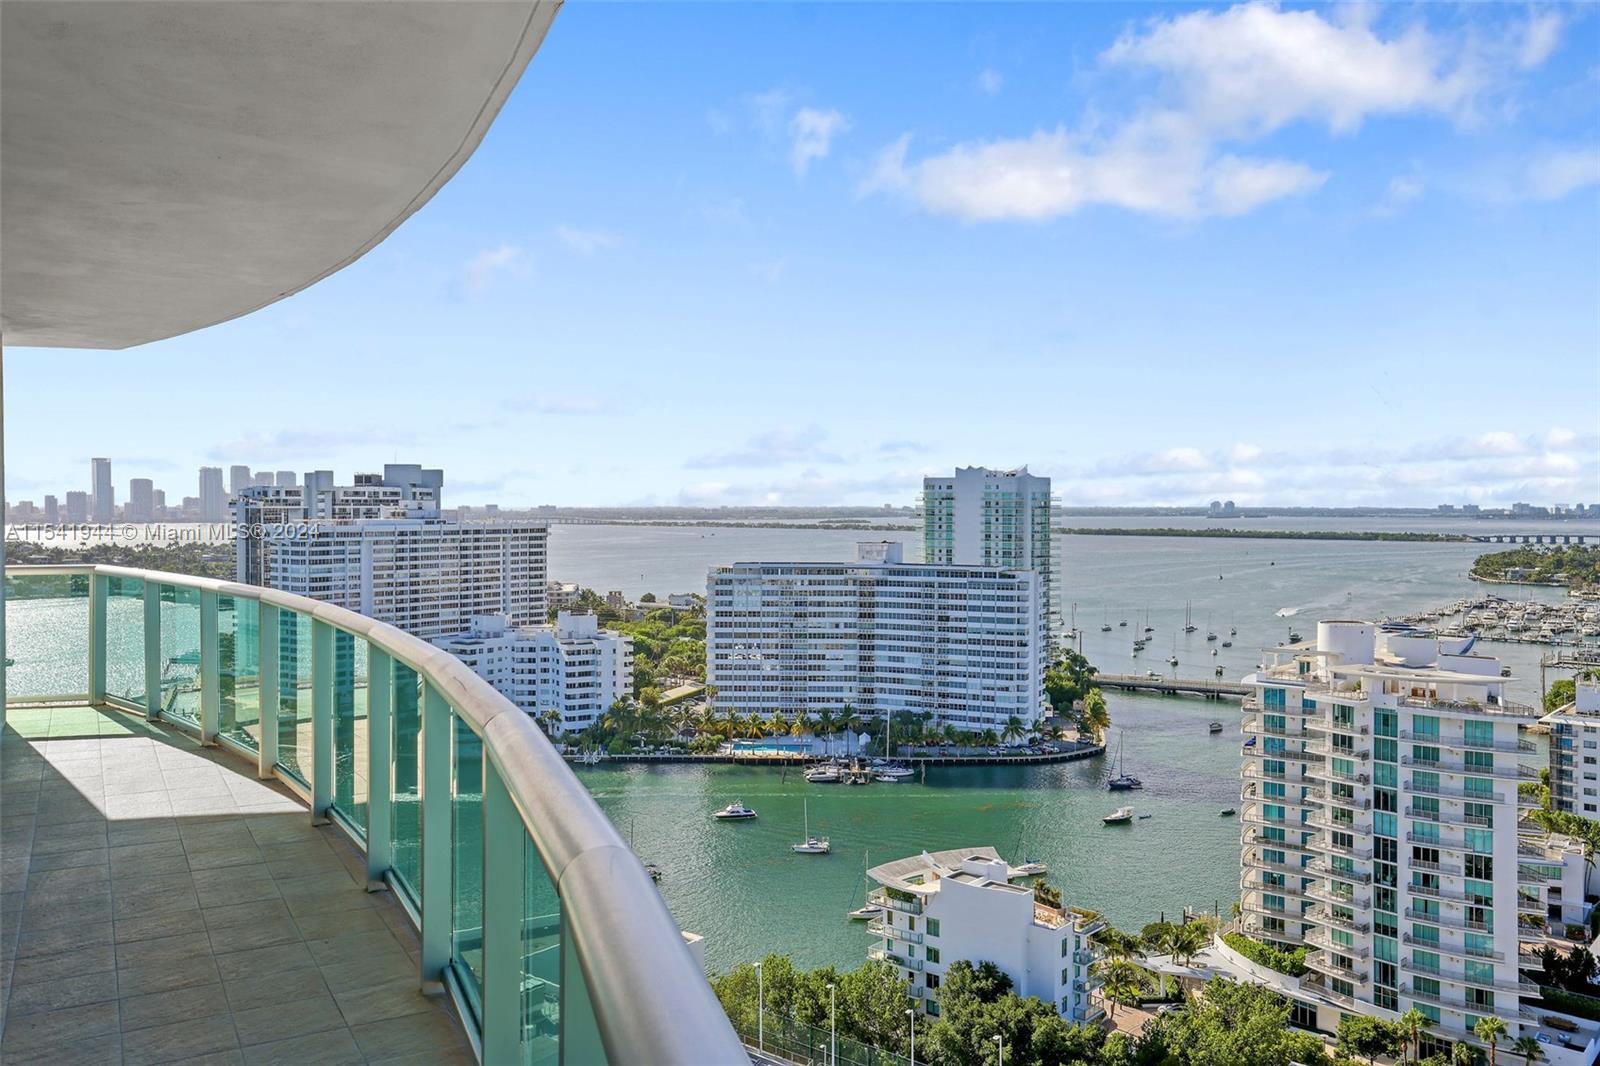 AVAILABLE 03/04. Photos may be from another floor, but are the same line. Welcome to residential community, Flamingo Point. This spacious 2 bedroom has direct Biscayne Bay Views. Features wood floors throughout, modern kitchen & baths w/SS appliances & granite counter tops. Amenities include a fitness center, resort style bay front pools surrounded by cabanas, l lounge chairs, a BBQ area. Move-in 1month + $2K deposit. Parking $187/m, Pet Fee: $500+$50/m. *FAST APPROVAL! (NOTE: Rental rates are subject to change depending on move-in date and lease term. Advertised rate is best rate and maybe on leases longer than 12 months. Proof of income greater than 3x 1 month's rent is required and minimum credit score of 620 or higher in order to be approved).